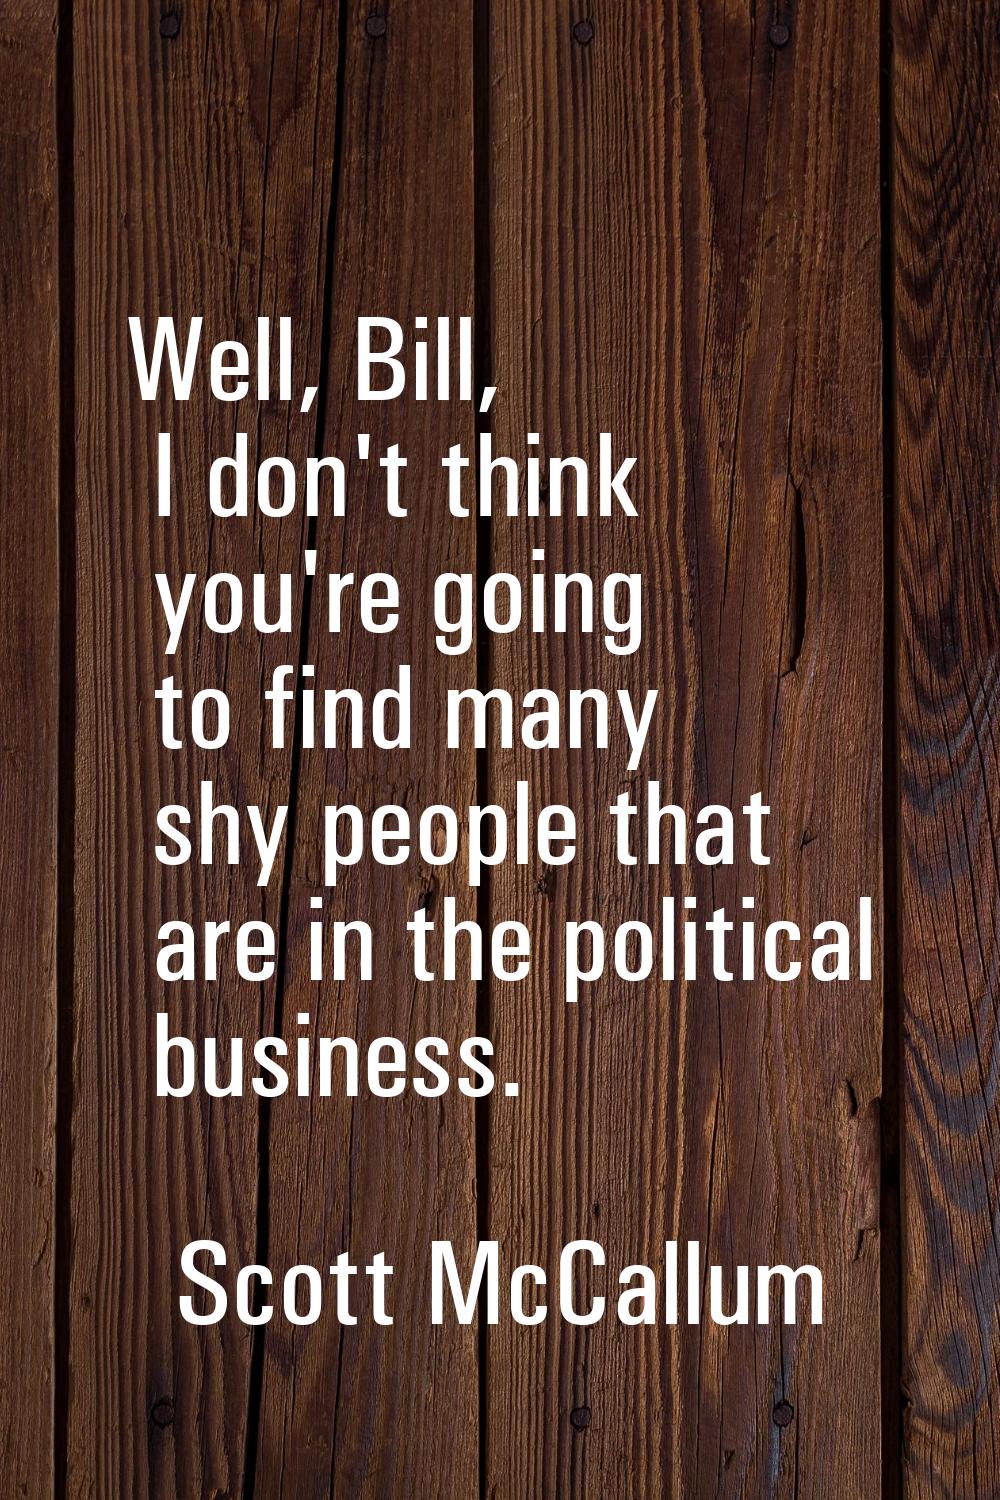 Well, Bill, I don't think you're going to find many shy people that are in the political business.